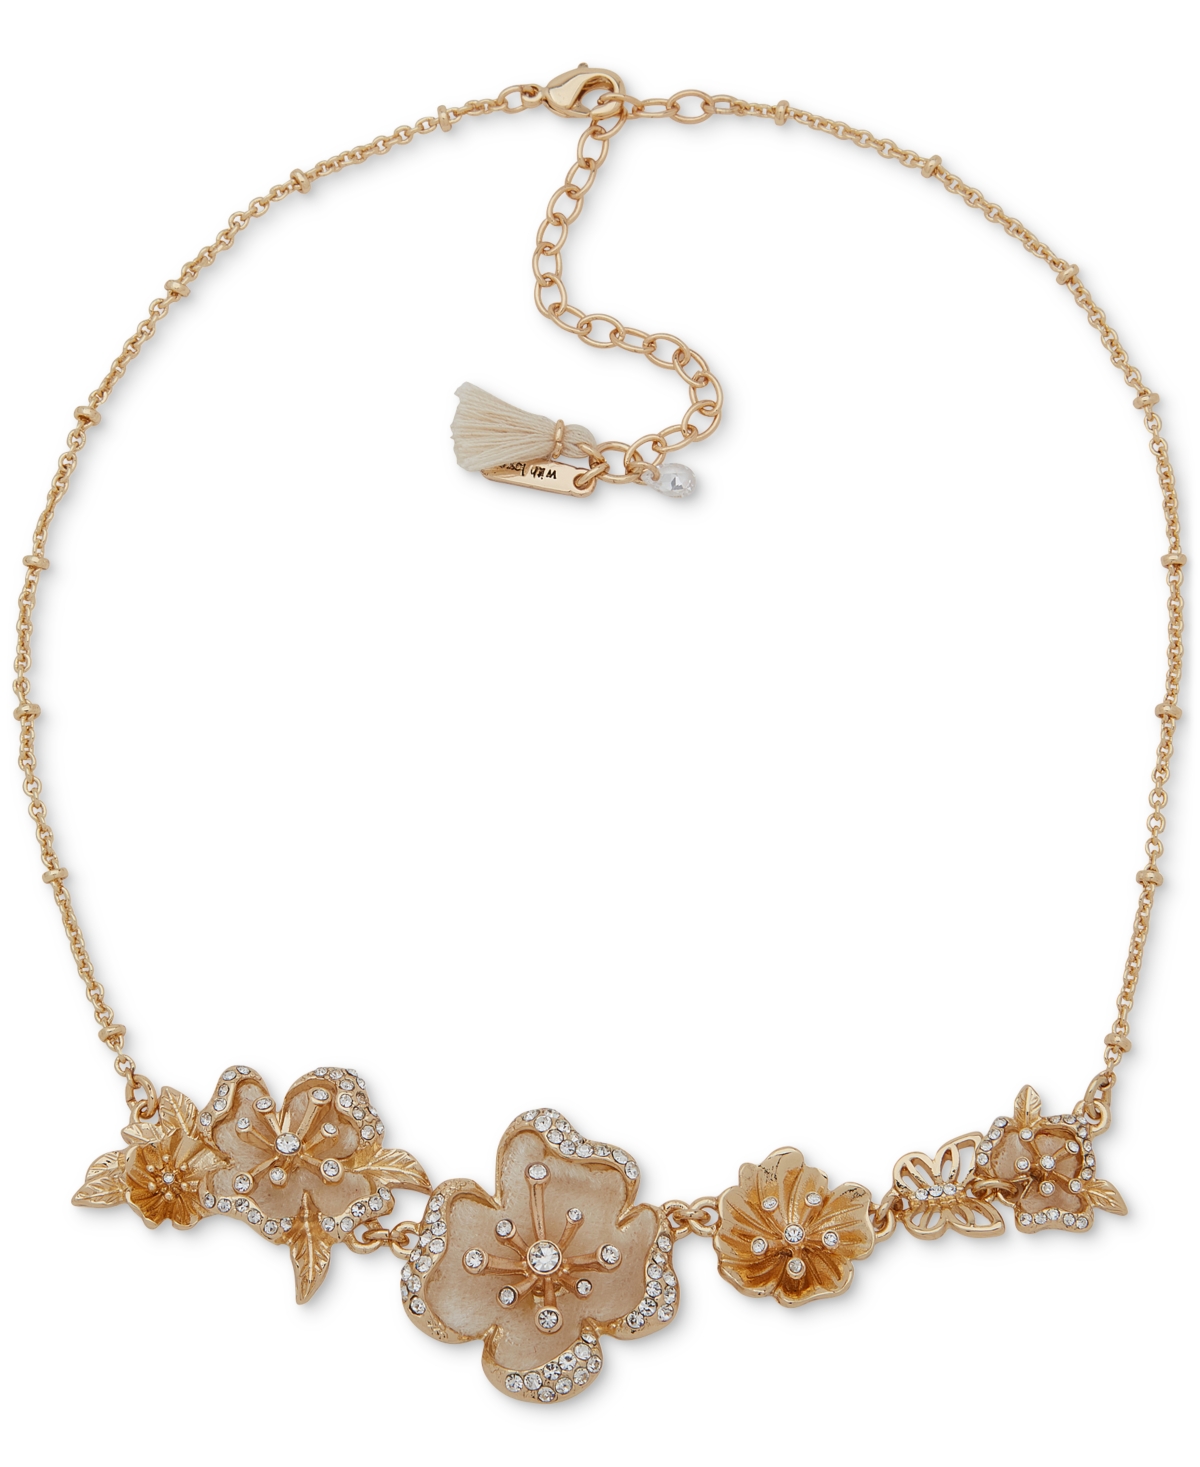 Lonna & Lilly Gold-tone Crystal Flower Frontal Necklace, 16" + 3" Extender In Natural